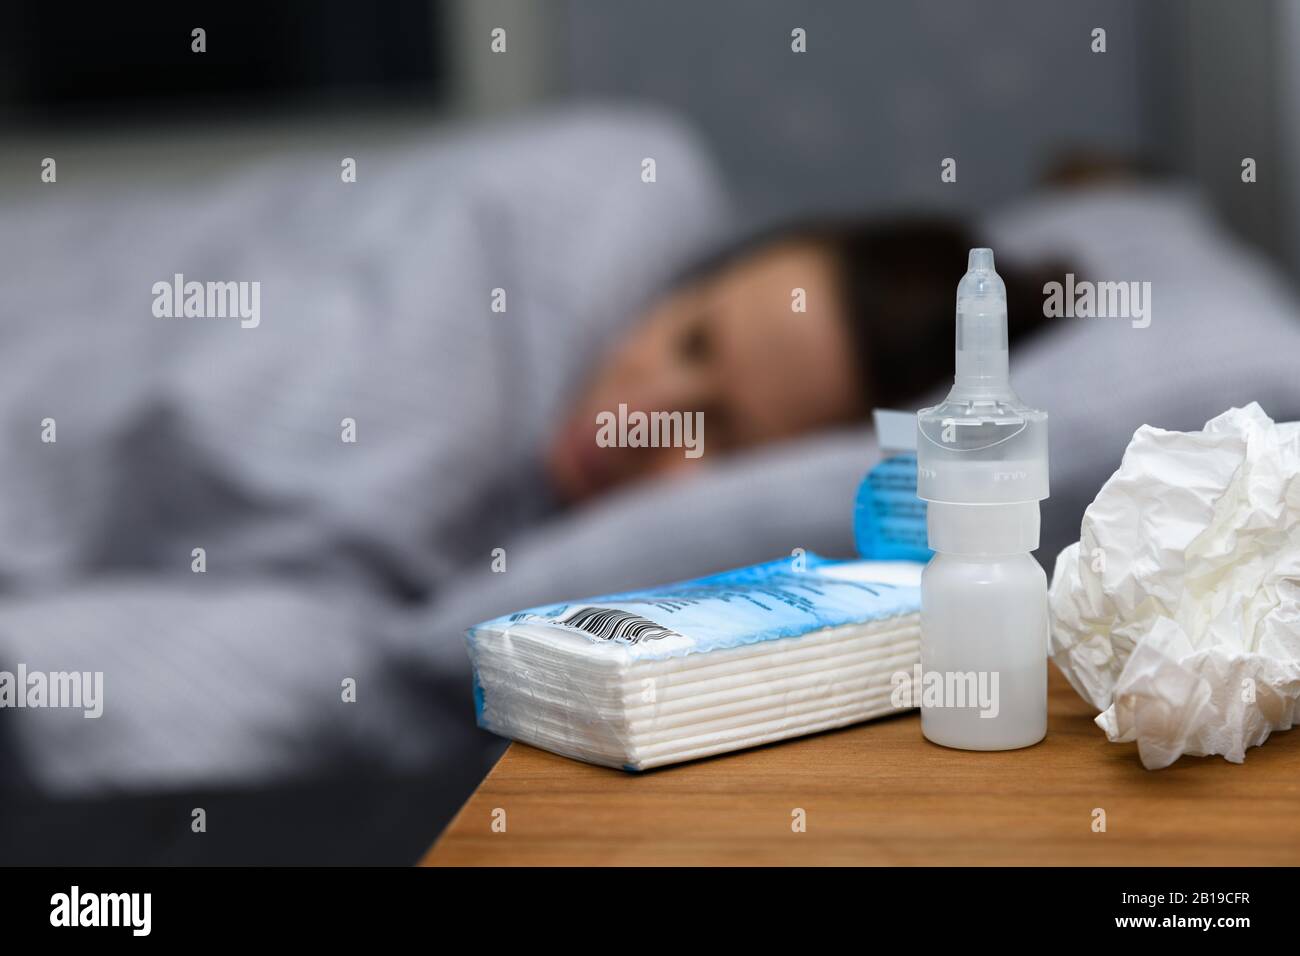 Woman with a cold lying in bed at home trying to cure herself. Concept of catching this years flu and are now trying to cure,rest, use nasal spray Stock Photo